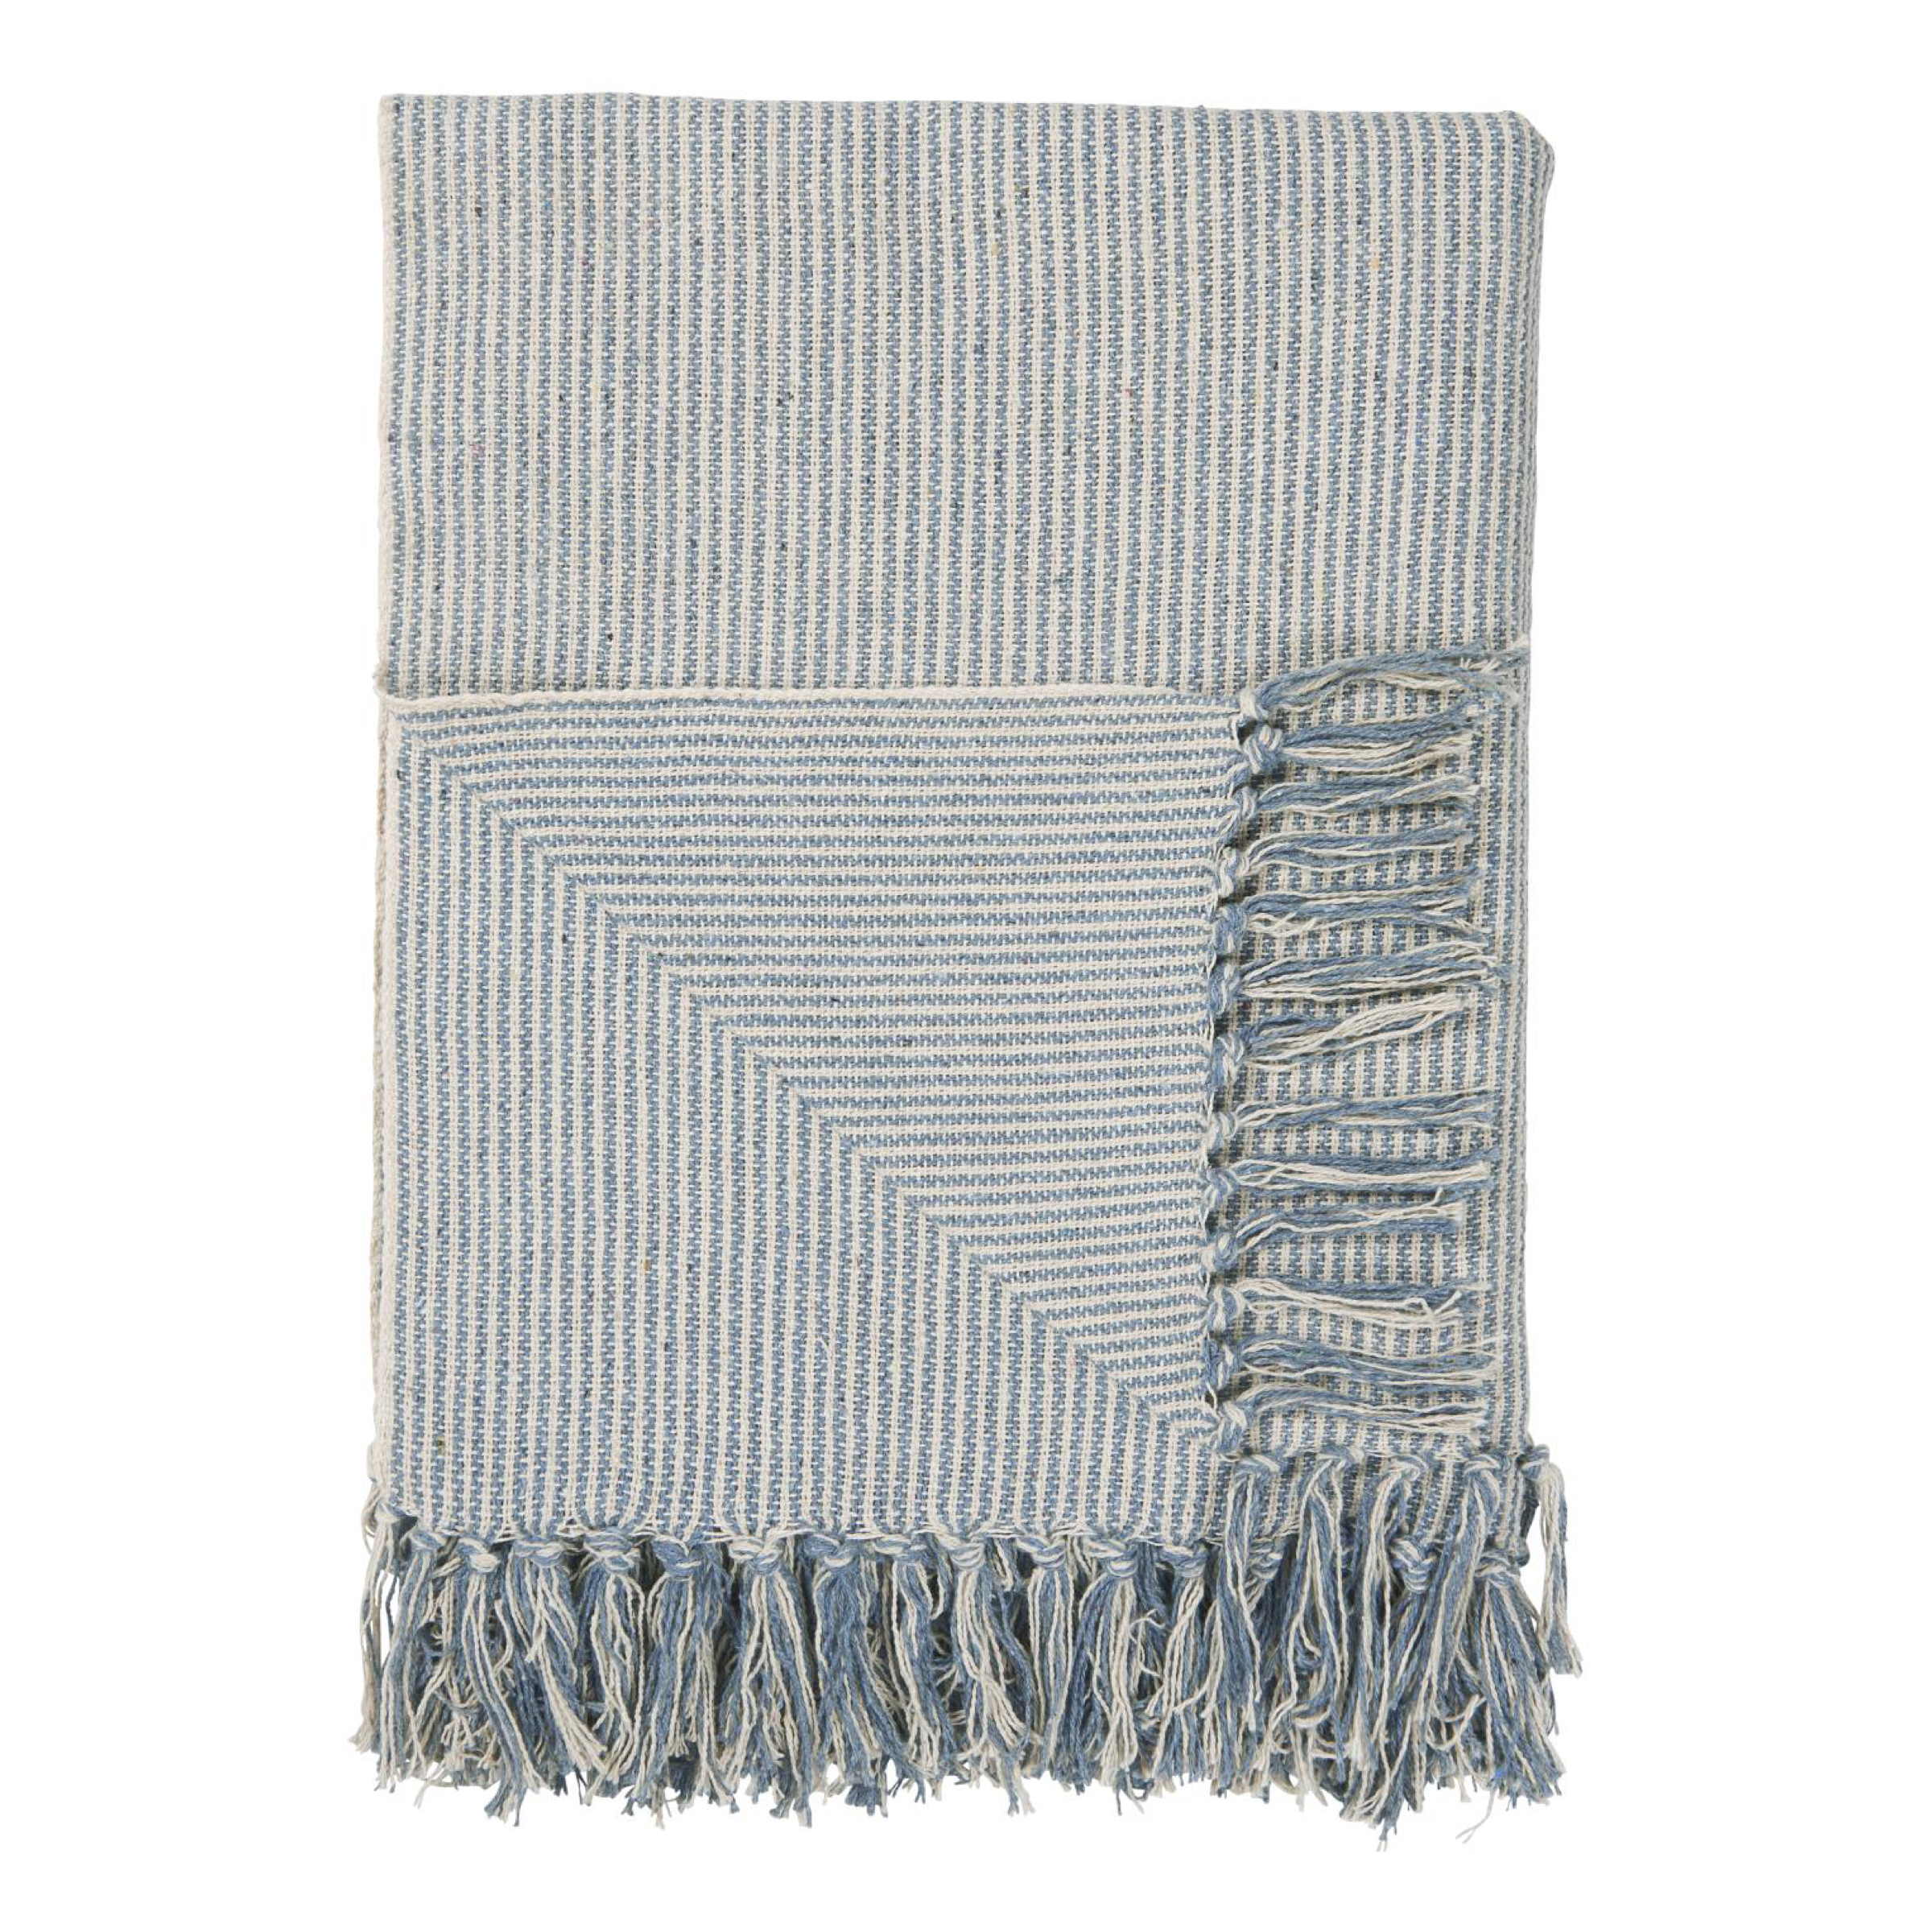 Ib Laursen Cream and Light Blue Cotton Throw with Thin Stripes